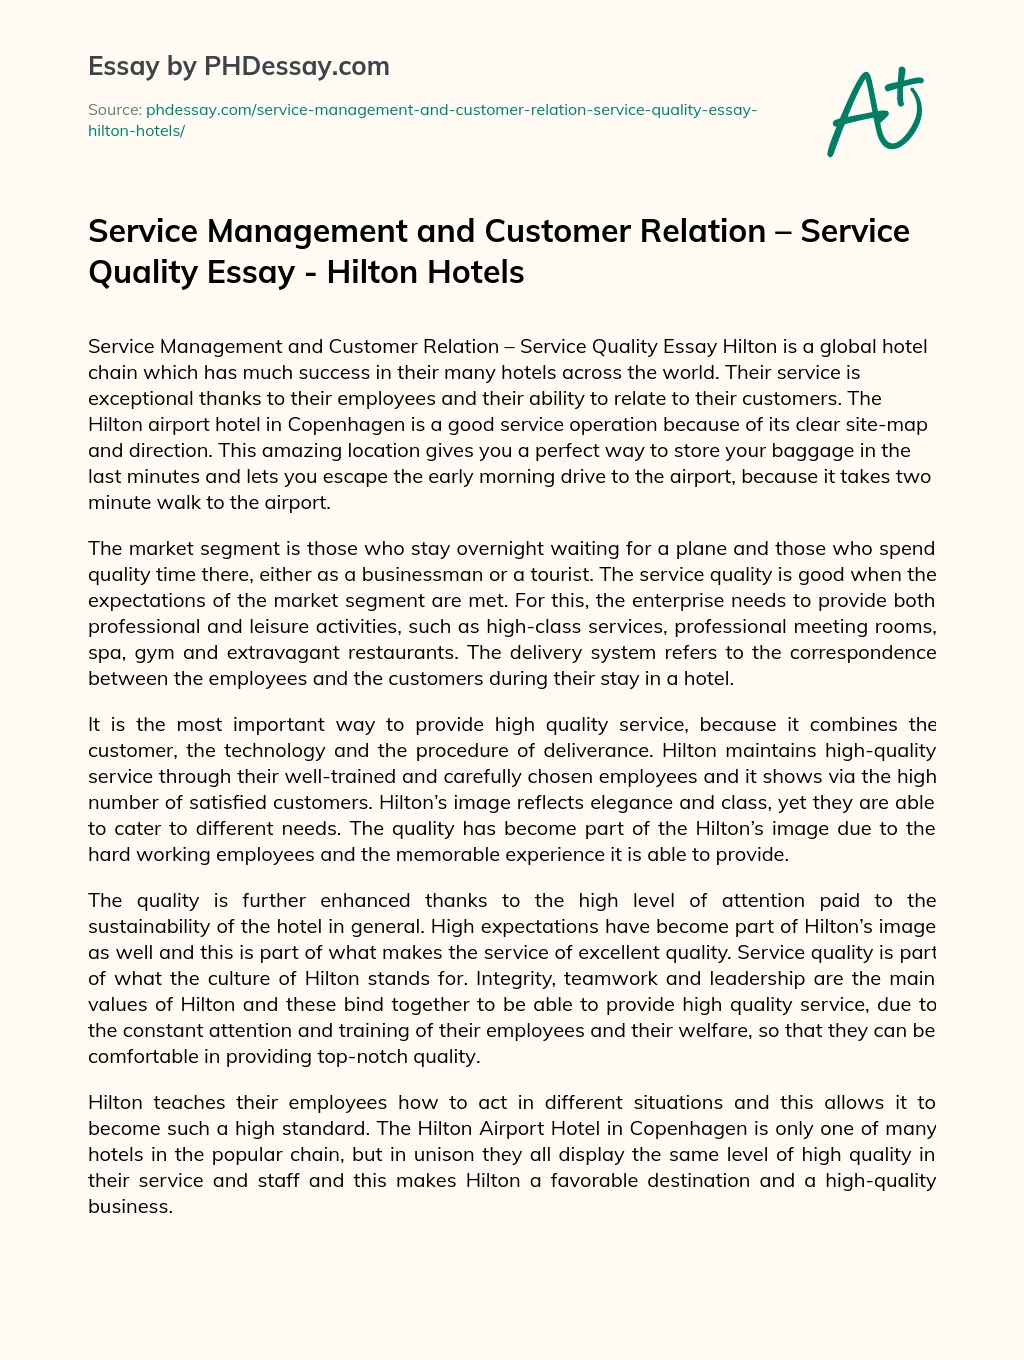 Service Management and Customer Relation – Service Quality Essay – Hilton Hotels essay